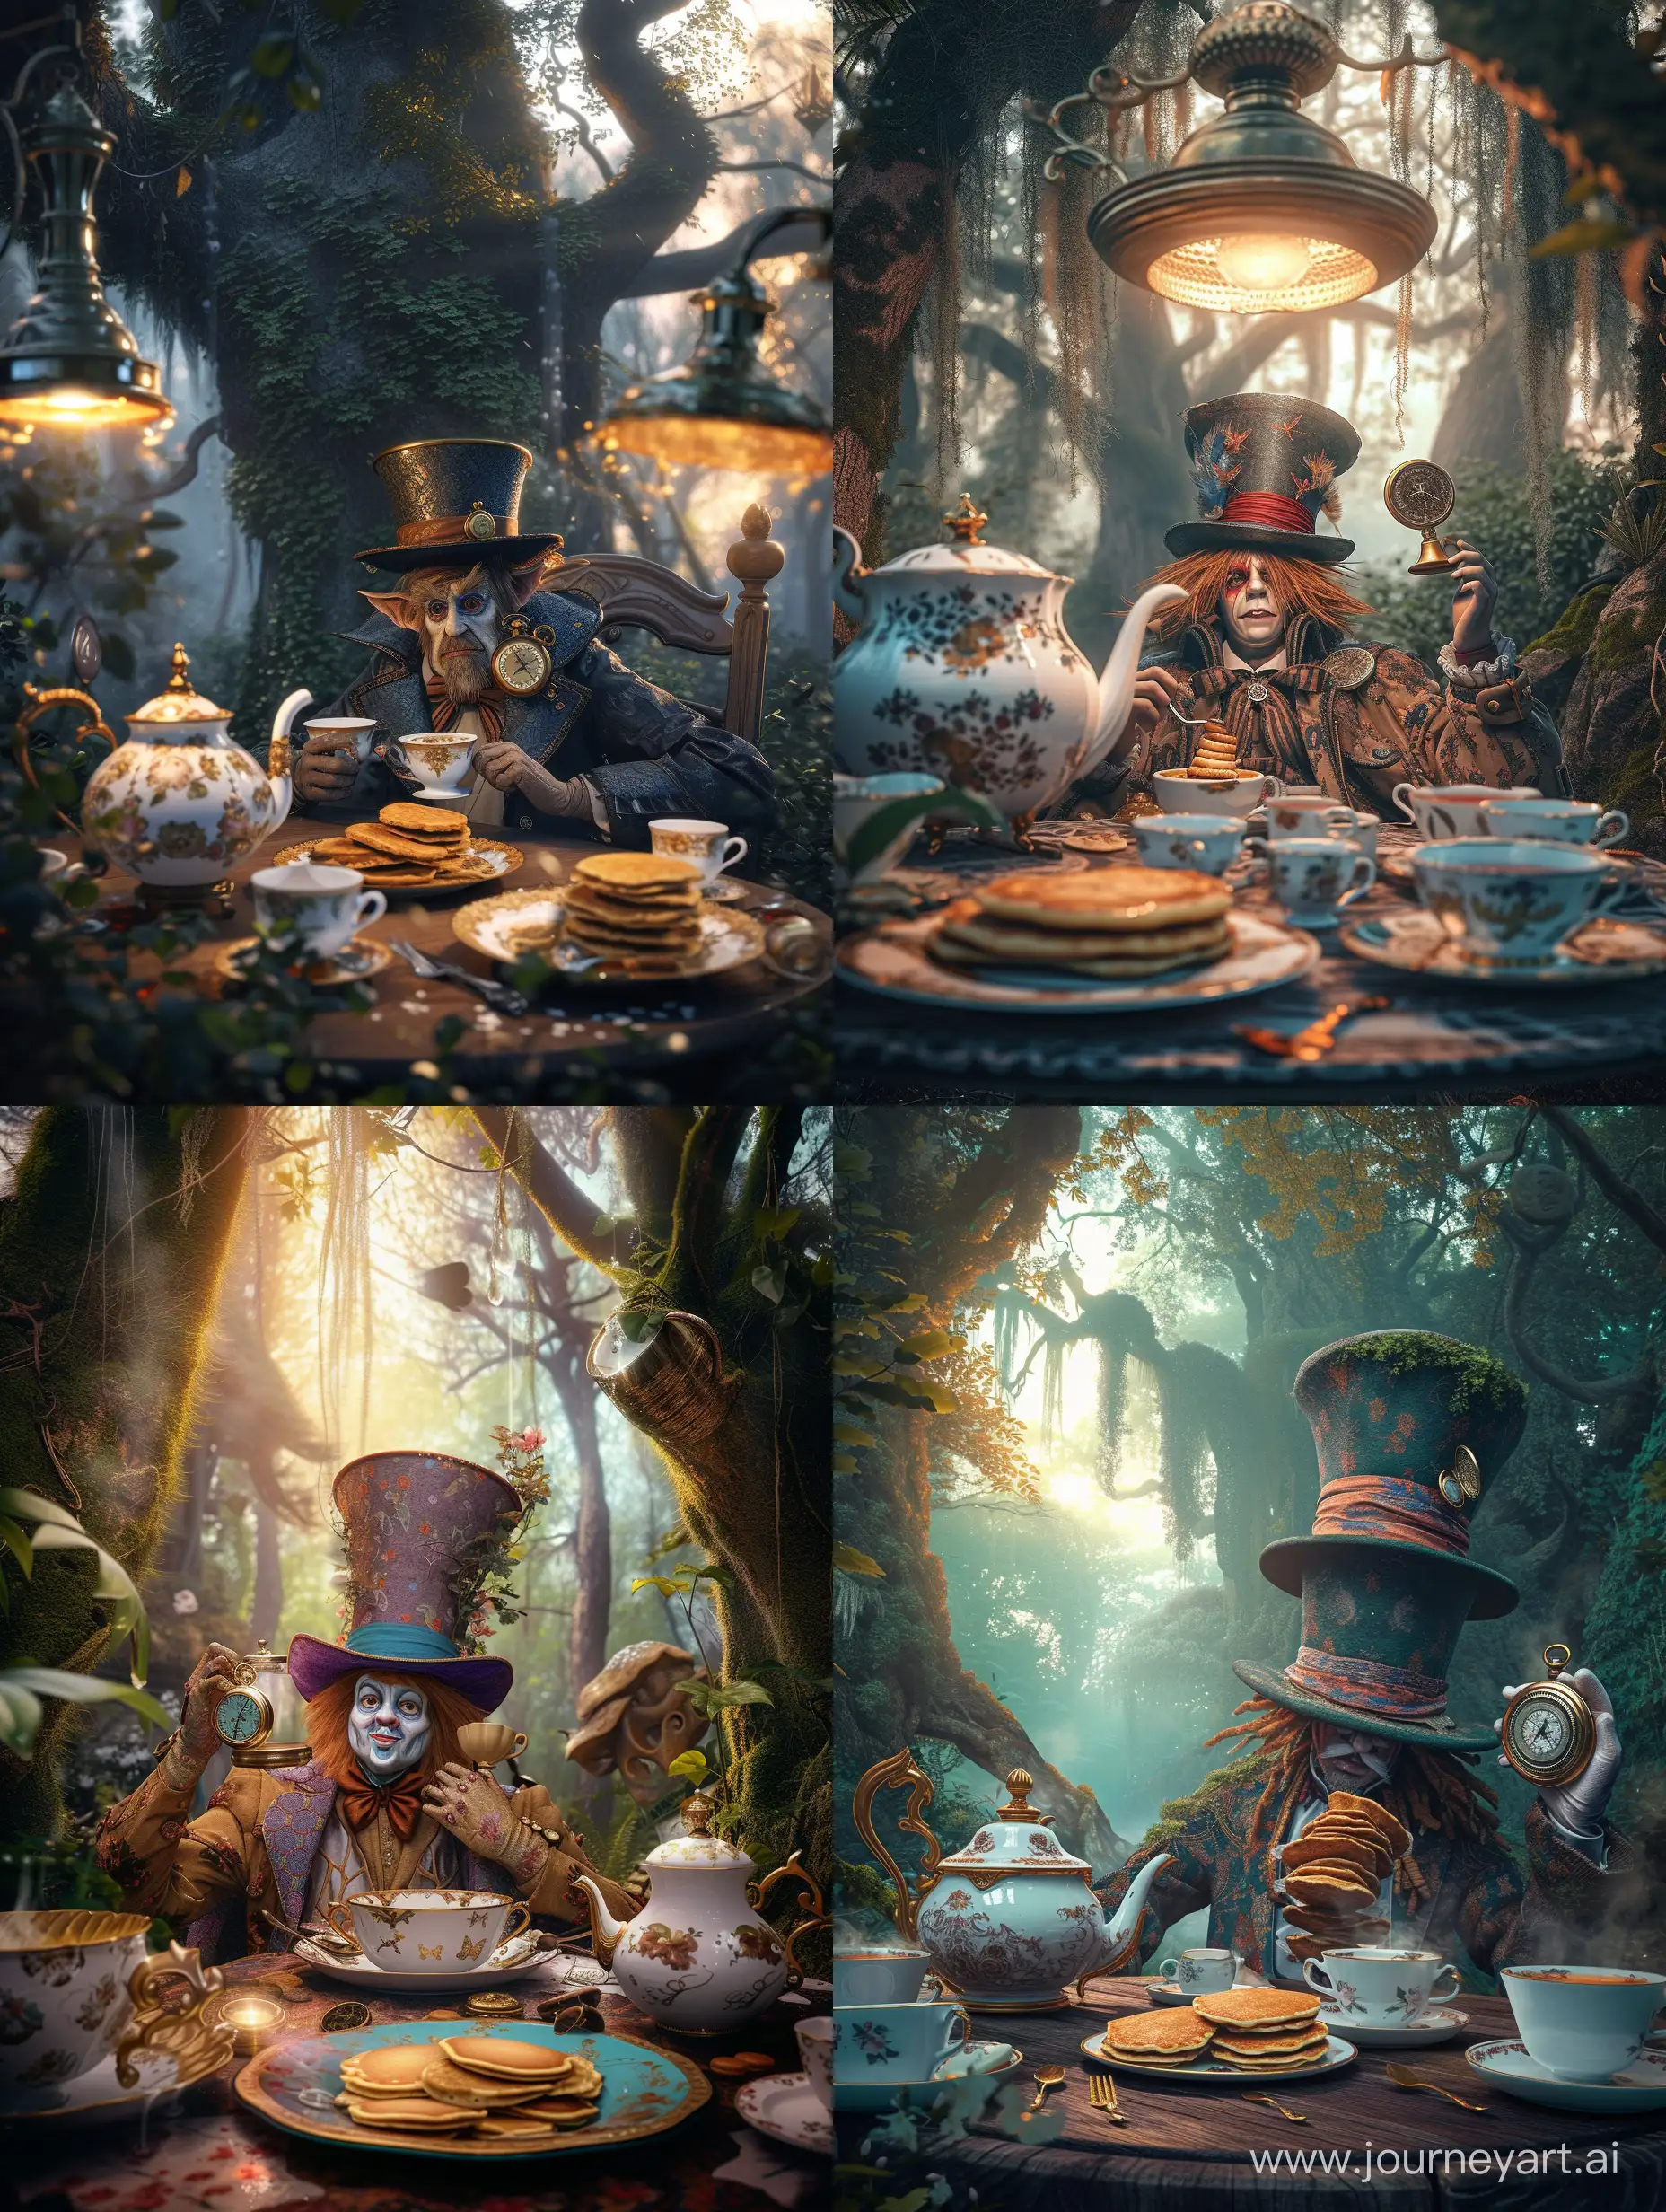 Whimsical-Tea-Time-with-Jolly-Hatterman-in-Enchanting-Forest-Setting